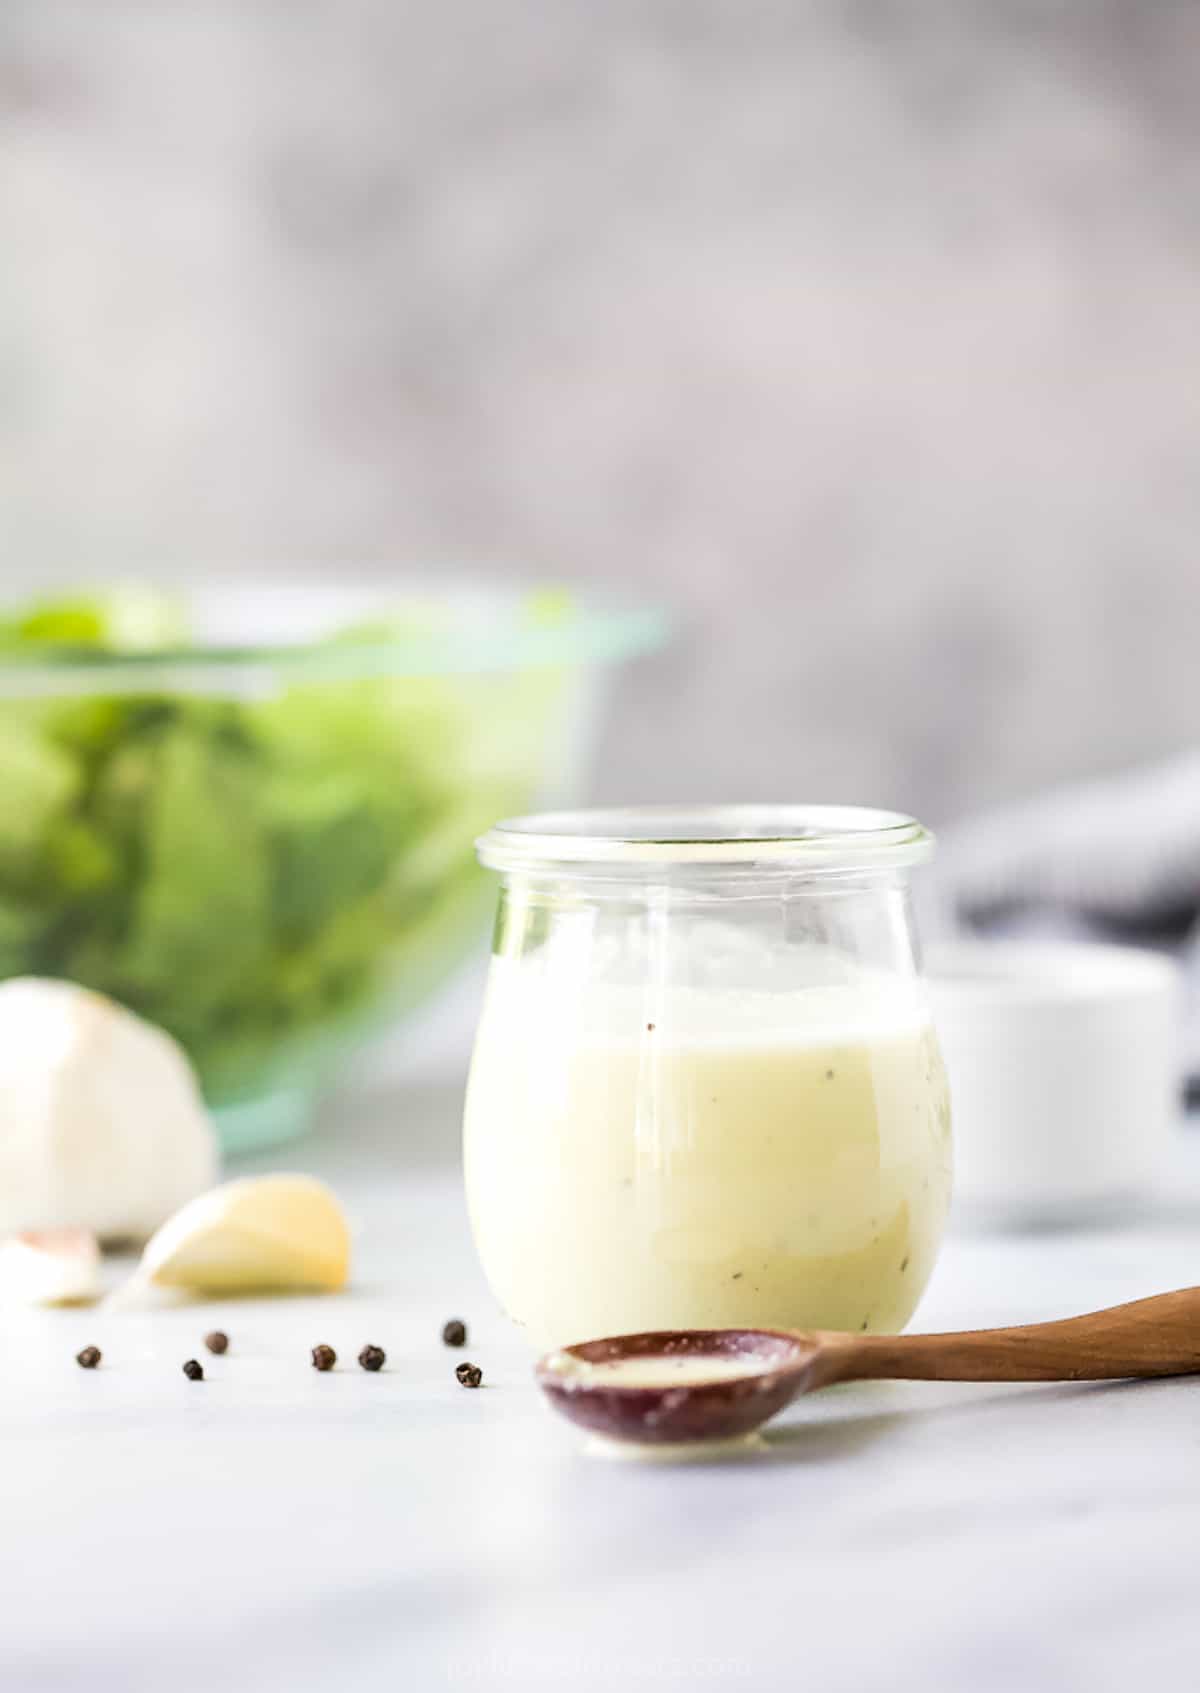 A glass full of homemade caesar dressing with a spoonful of dressing on the counter beside it